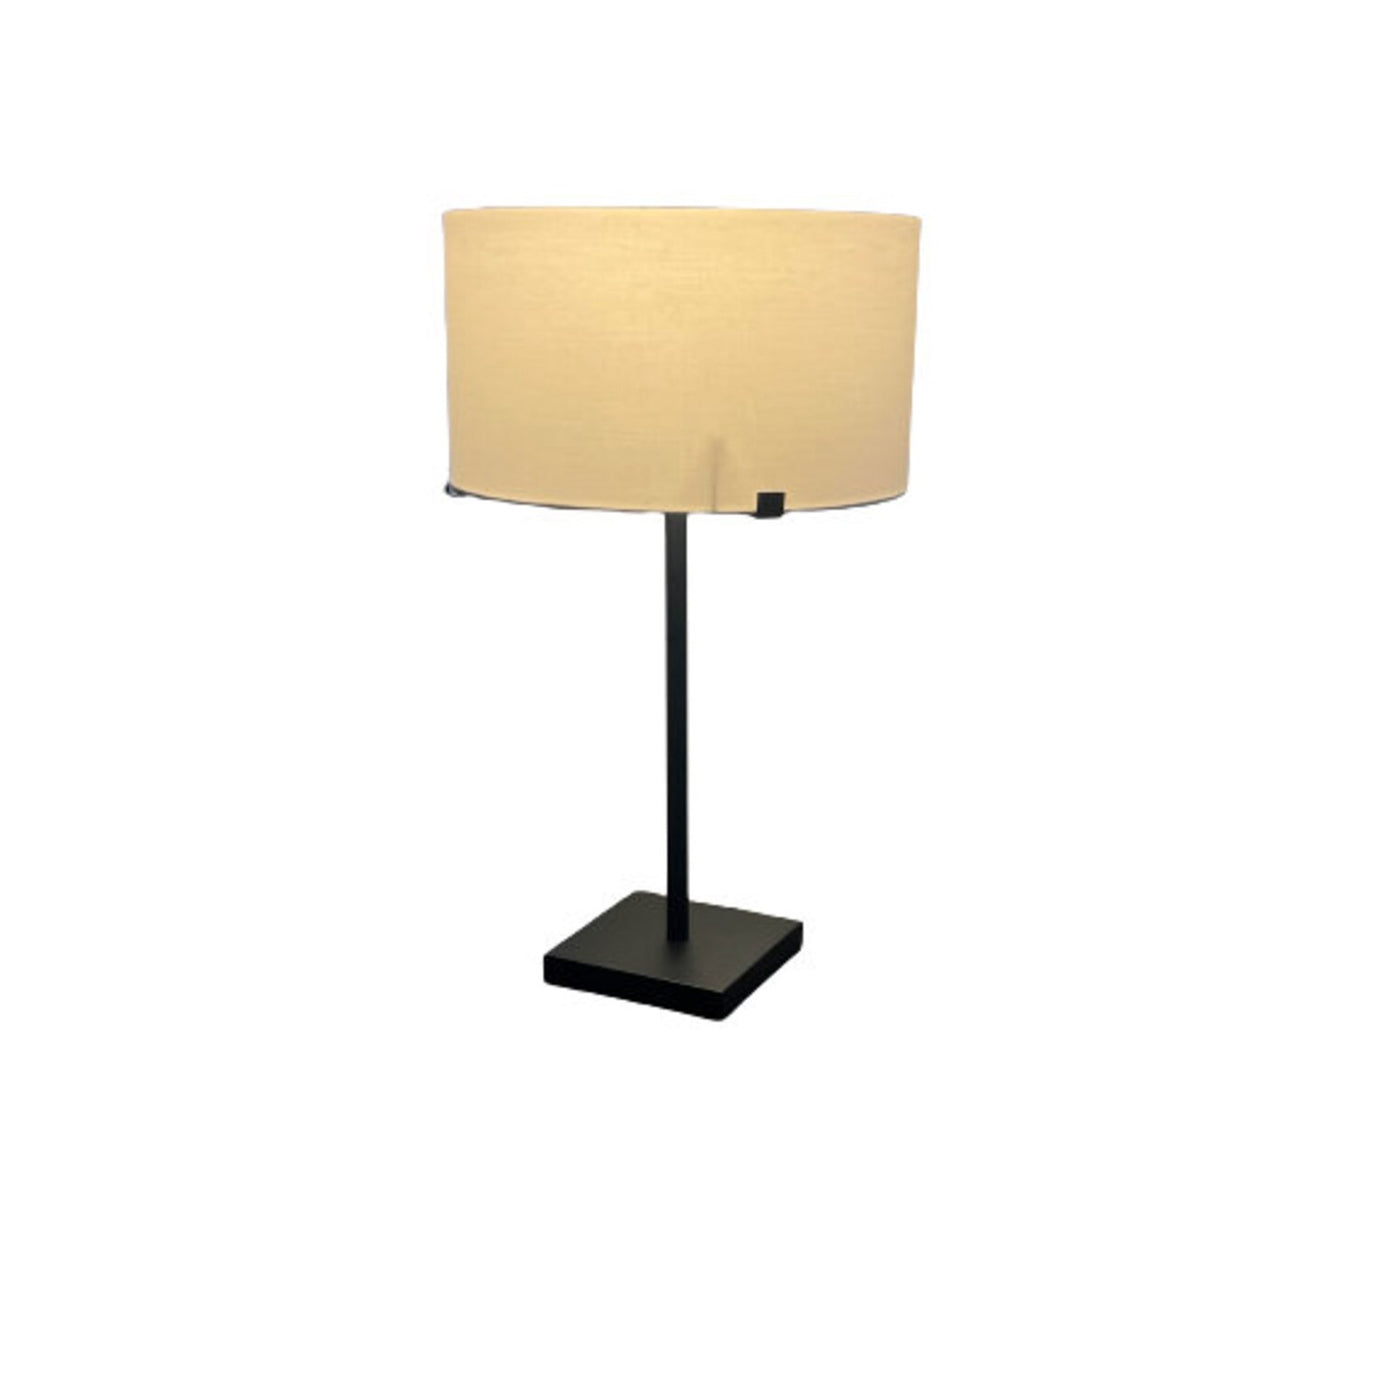 24" Cross Brace Table Lamp Black Finish White Fabric Shade with Bulb